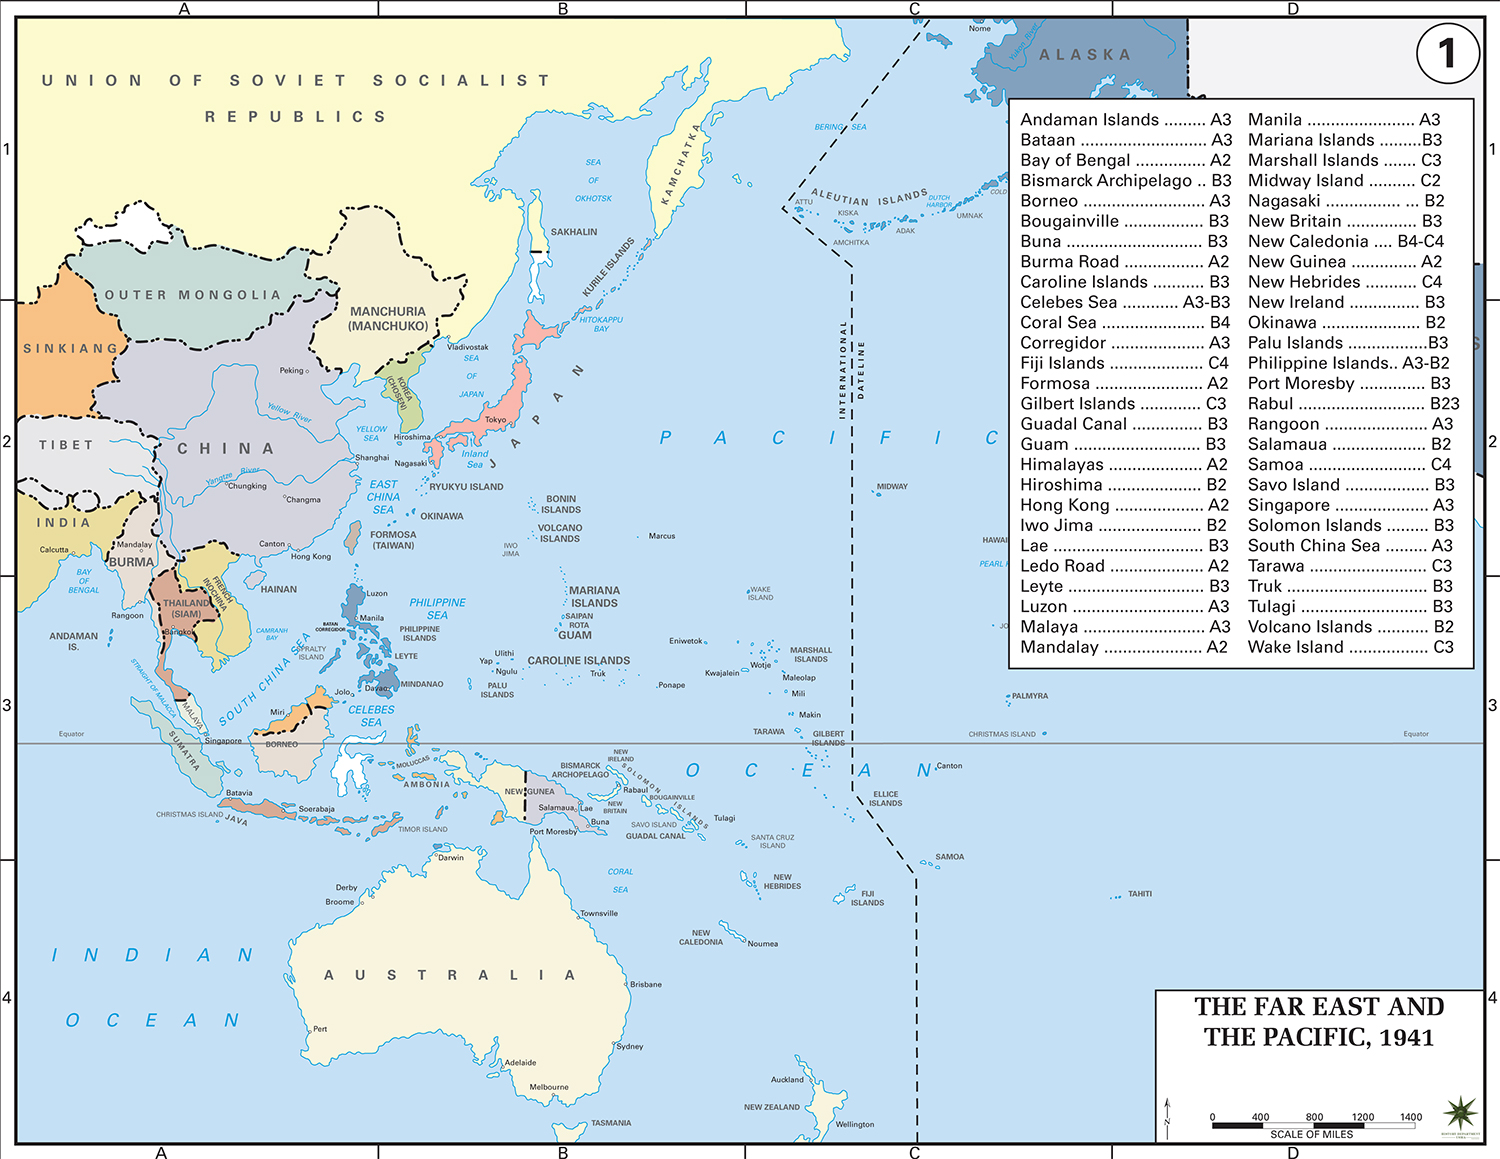 History Map of WWII: The Far East and the Pacific 1941